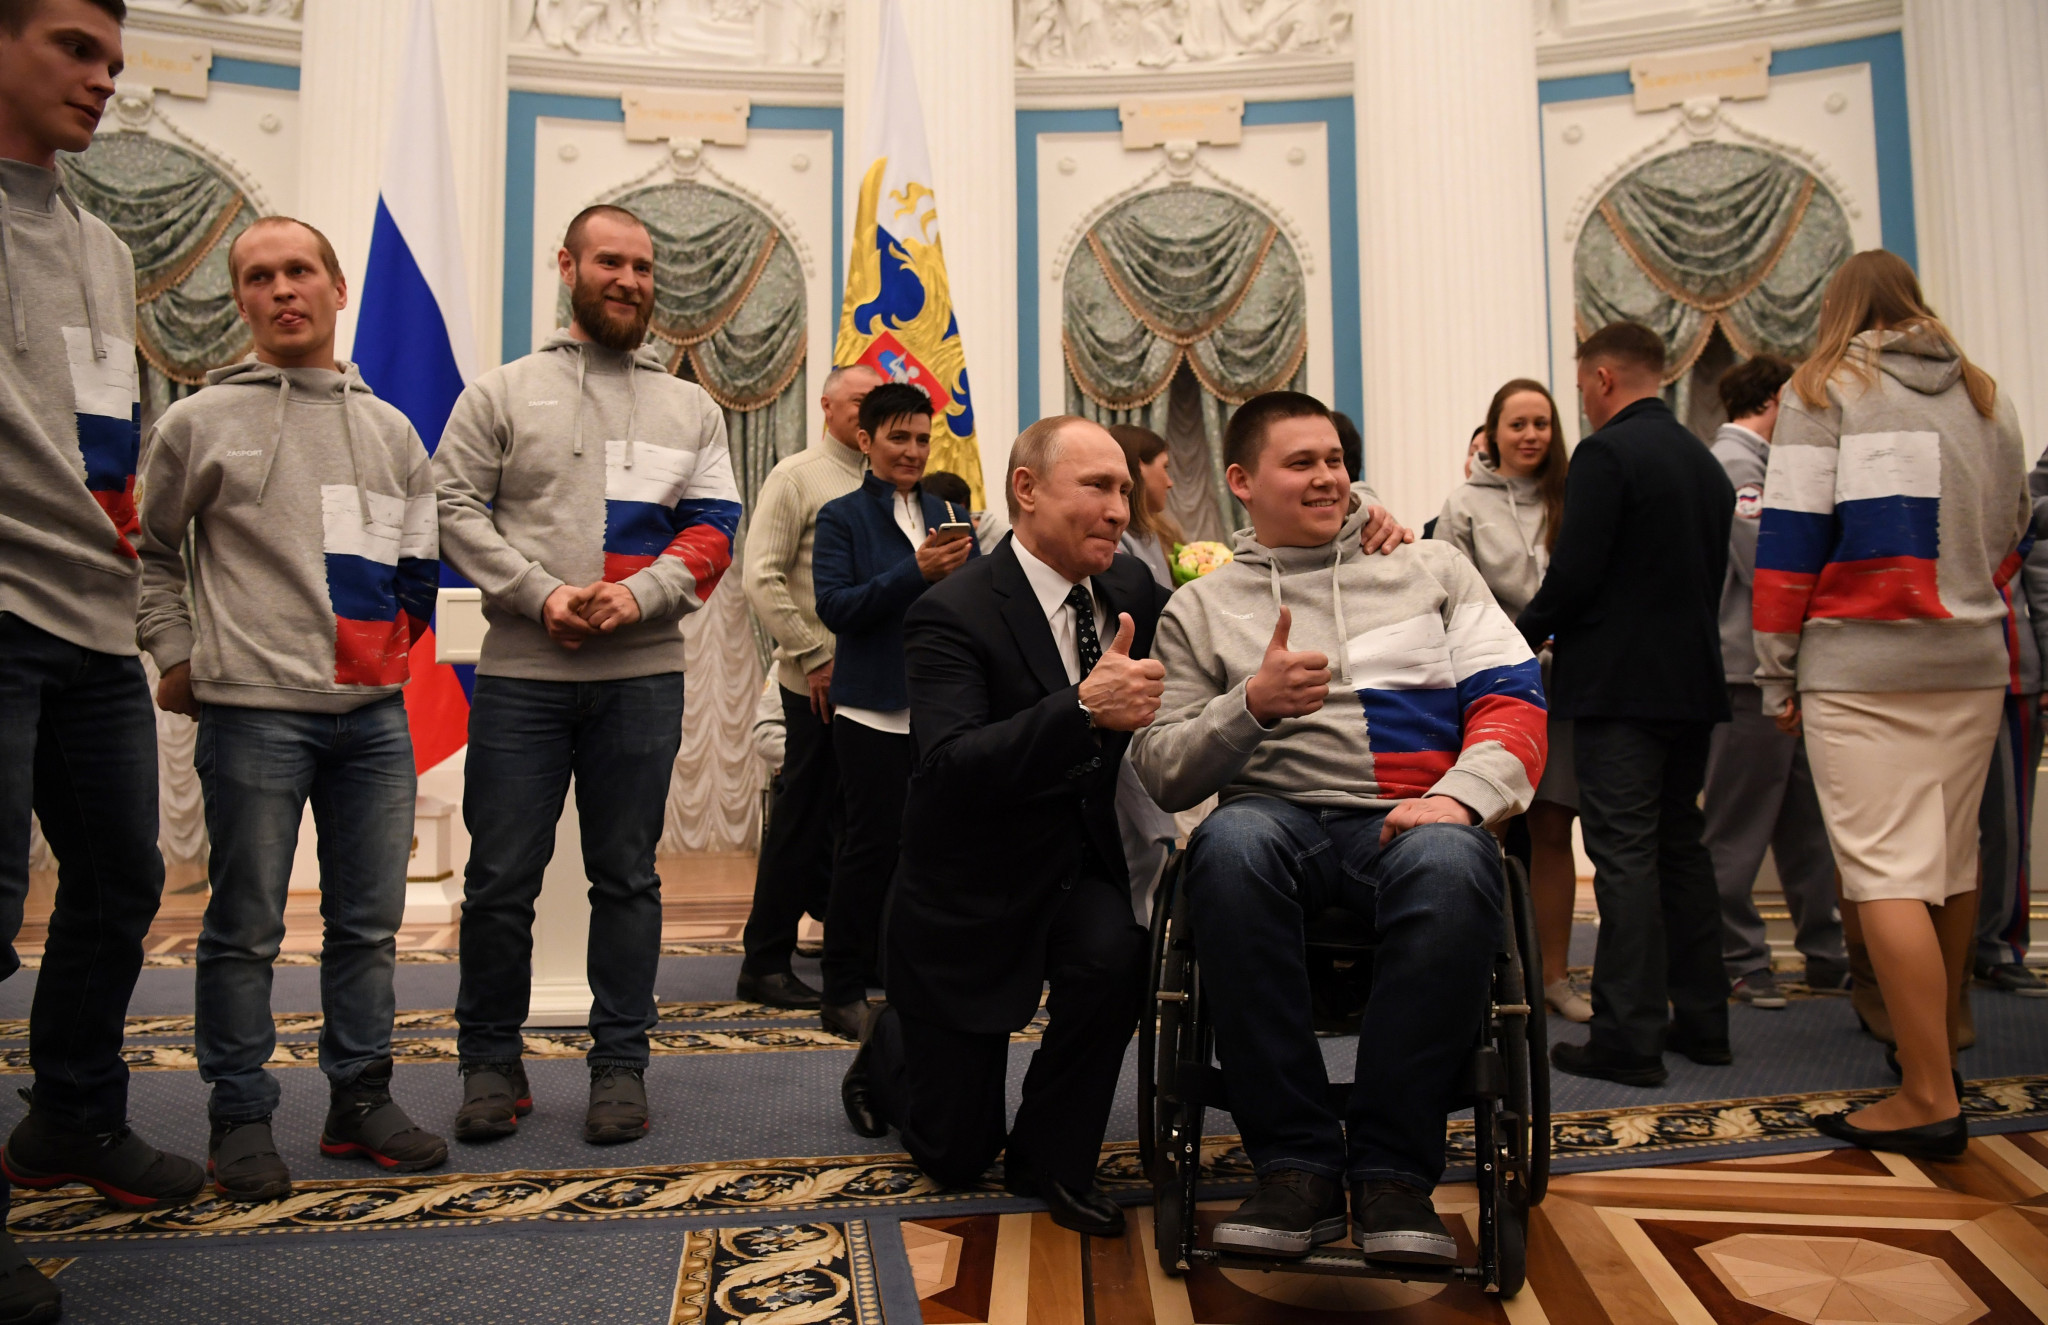 Vladimir Putin held a reception for Russian athletes who competed at the Pyeongchang 2018 Winter Paralympics ©Getty Images